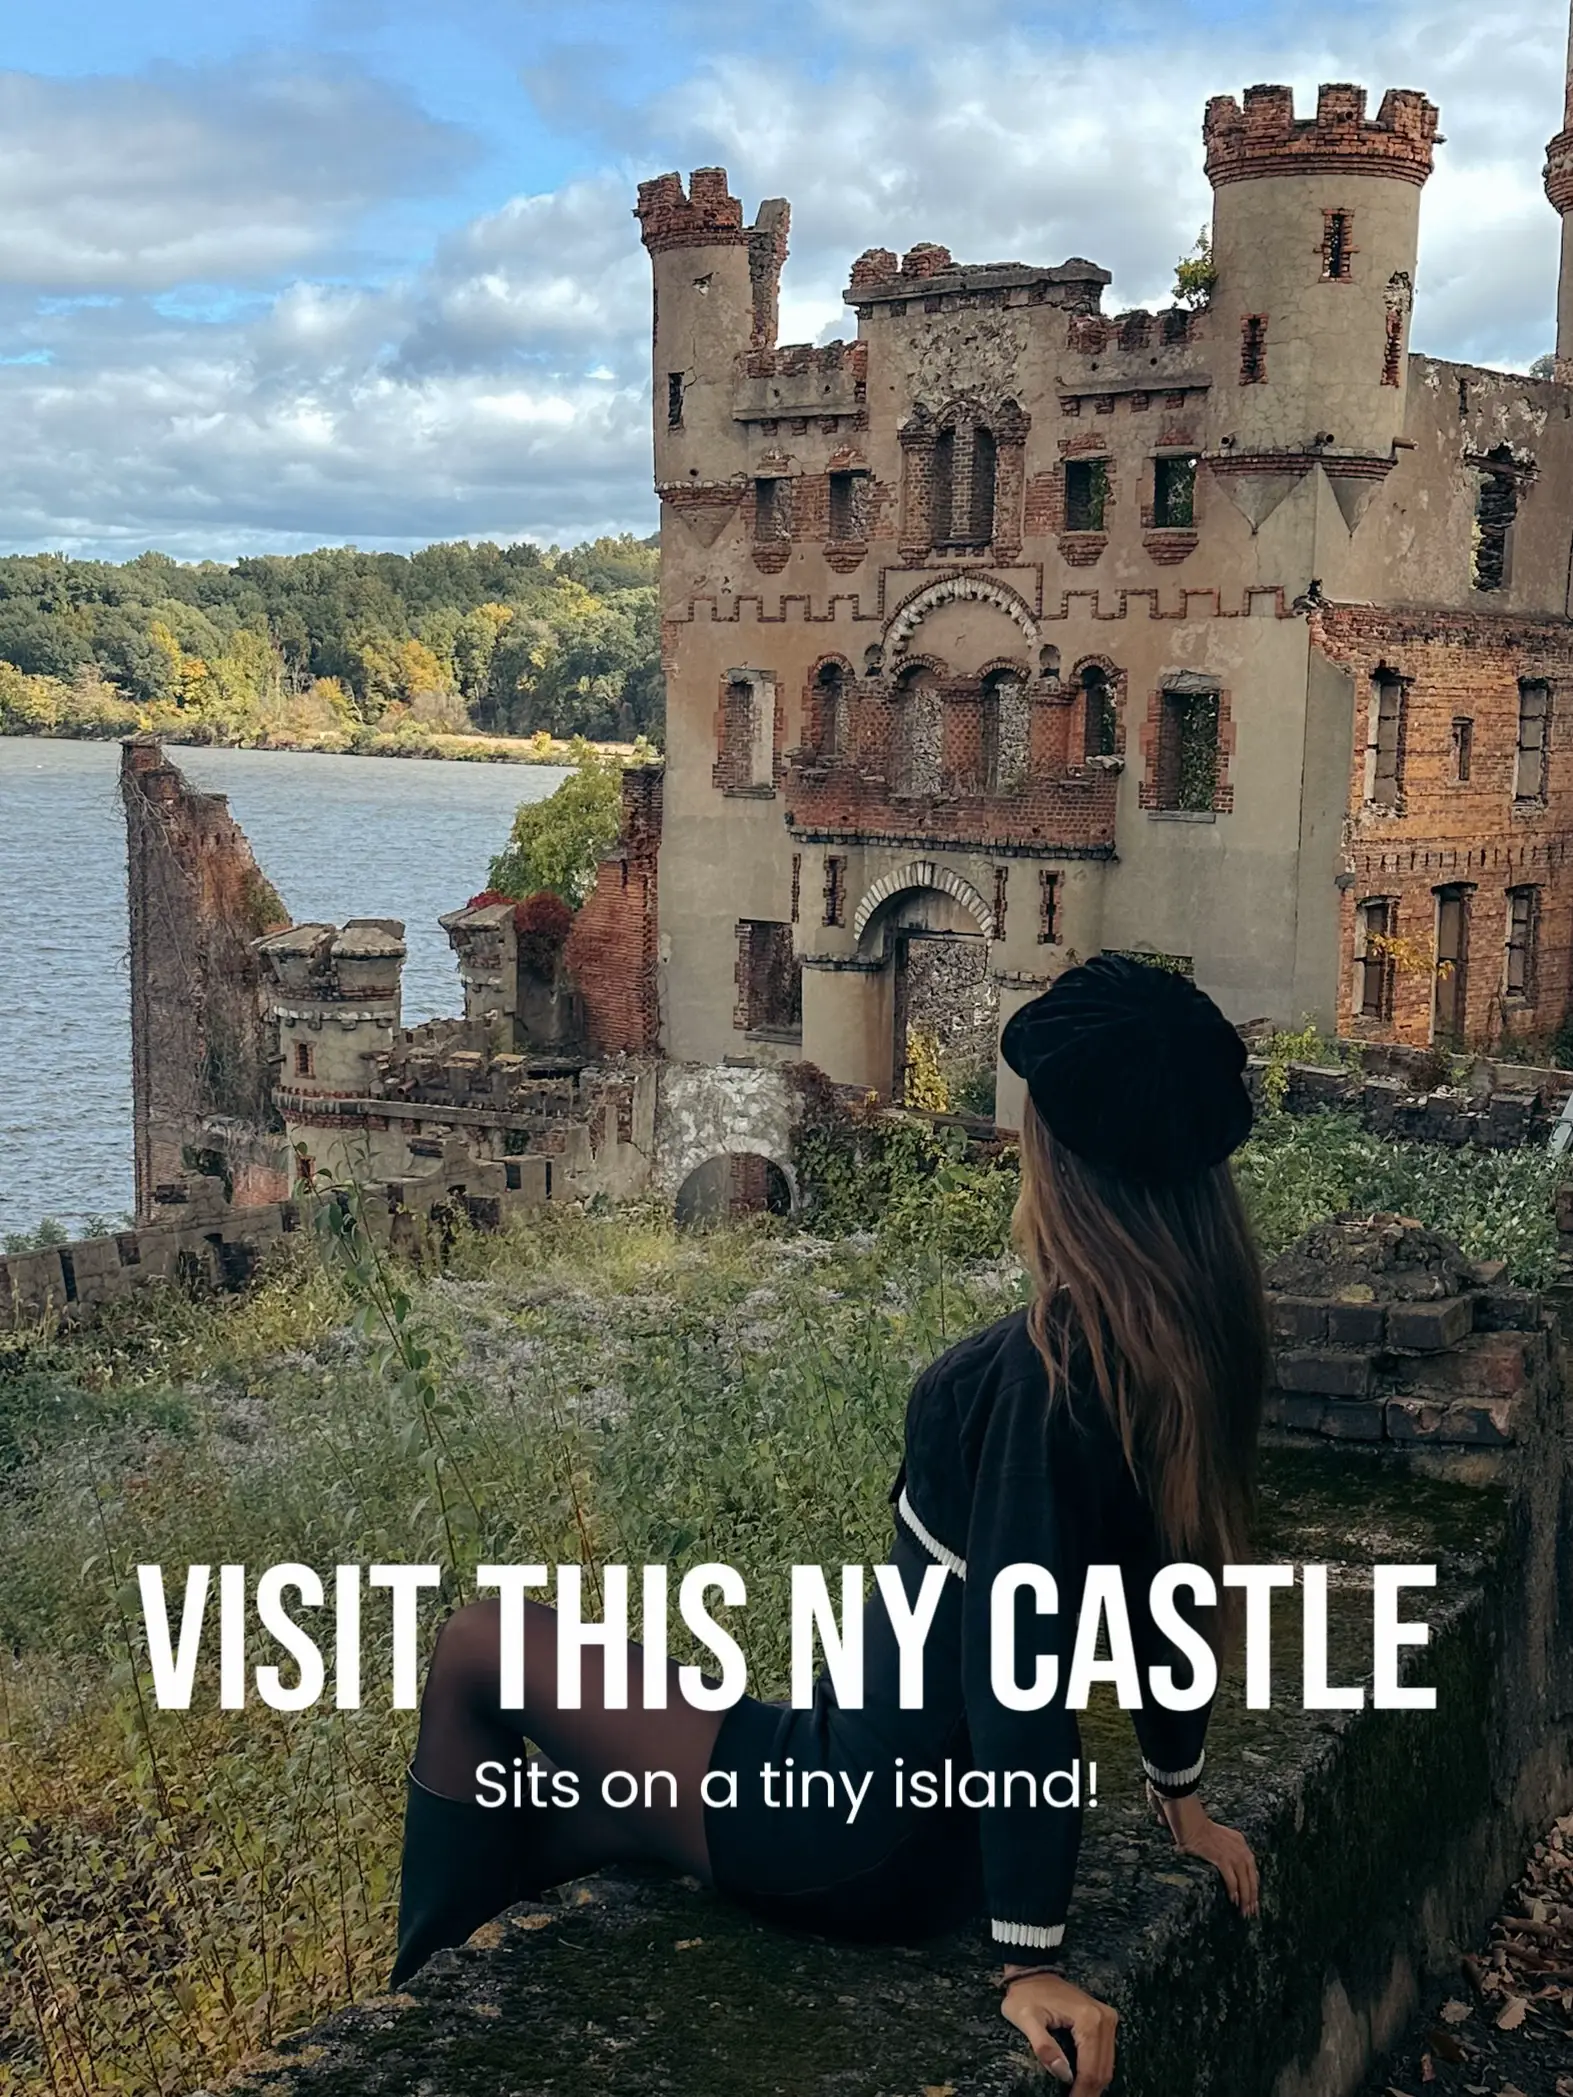 This NY Castle sits on a tiny island!'s images